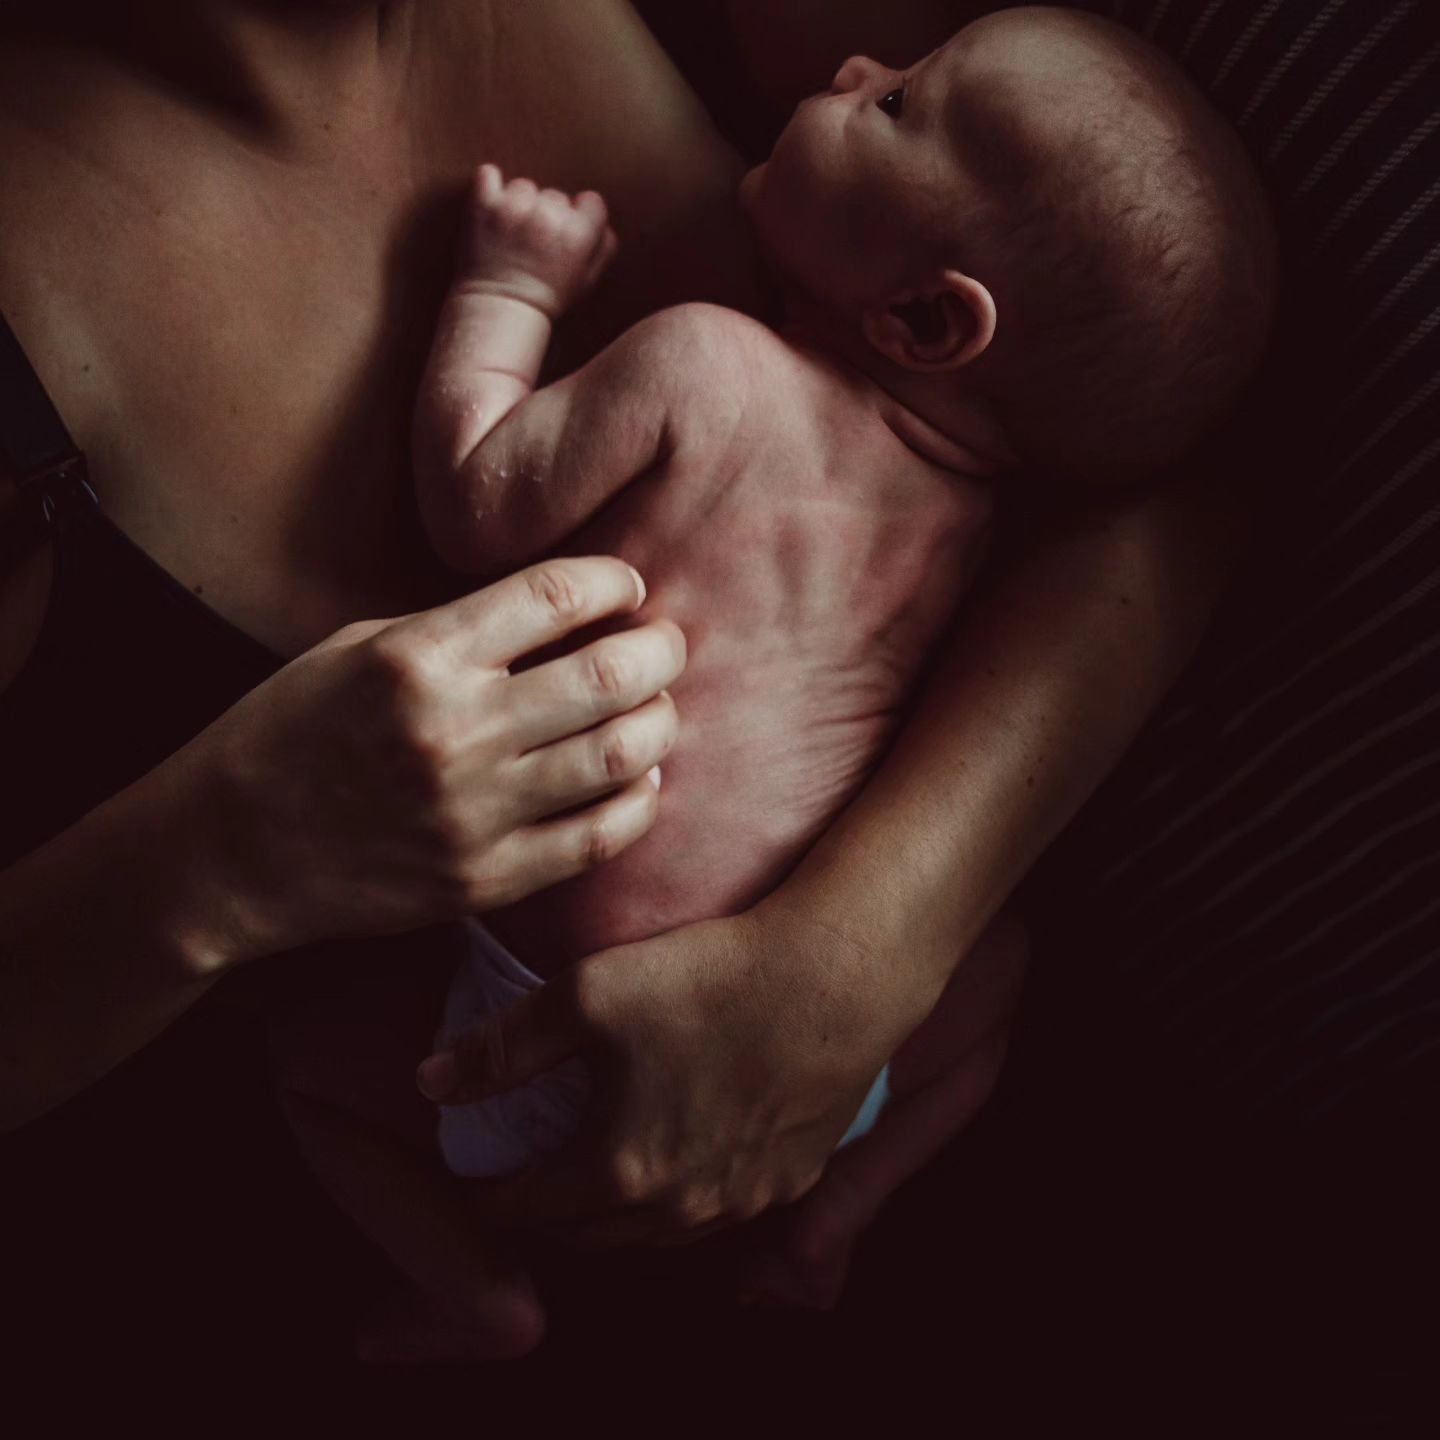 Babies are really intuitive with knowing when we as parents need a little break in our day.

A few minutes to slow down, reset, simply be present.

When babies make us stop for a moment; to feed, to snuggle to sleep, to rock, they are also giving us 